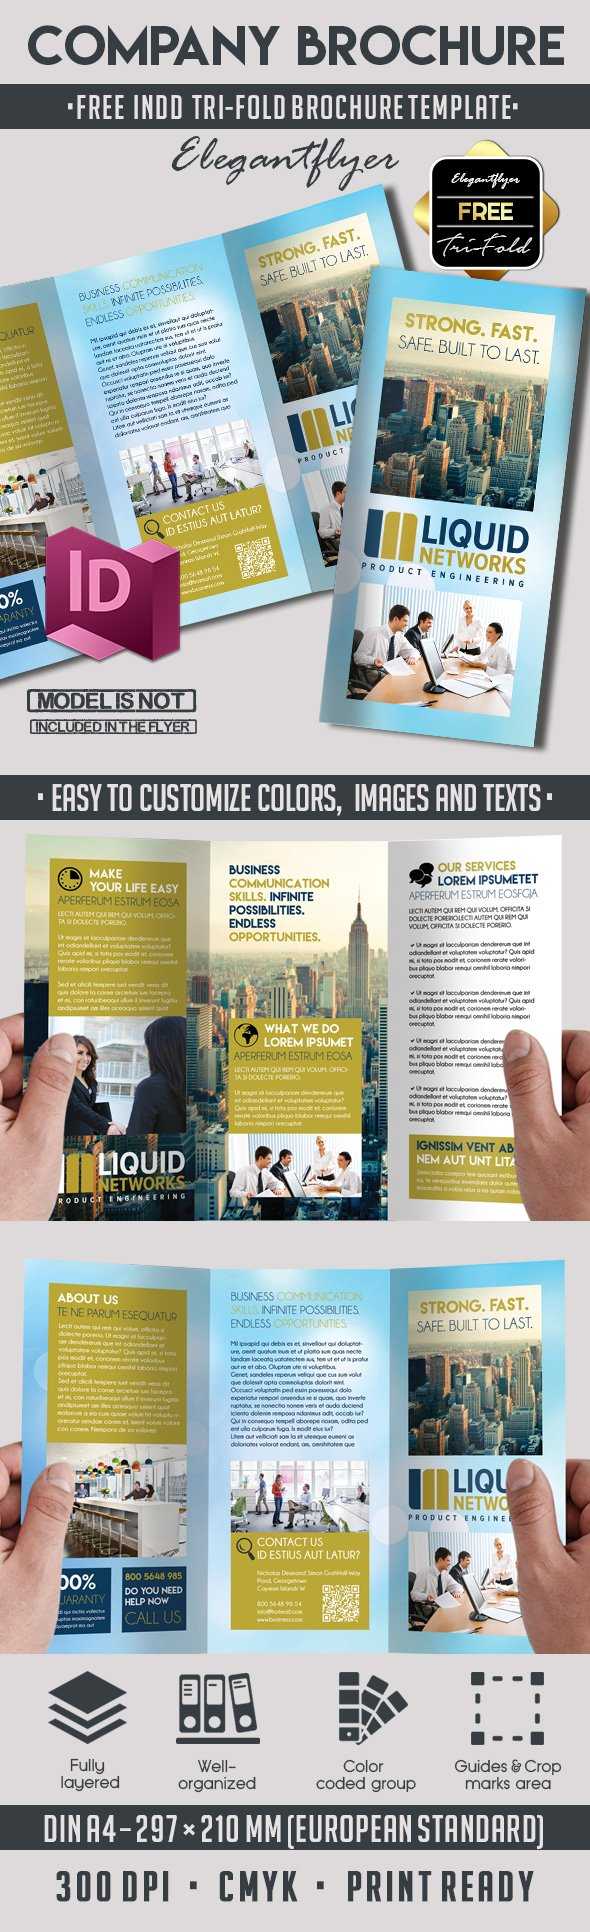 5 Powerful Free Adobe Indesign Brochures Templates! | In Adobe Tri Fold Brochure Template